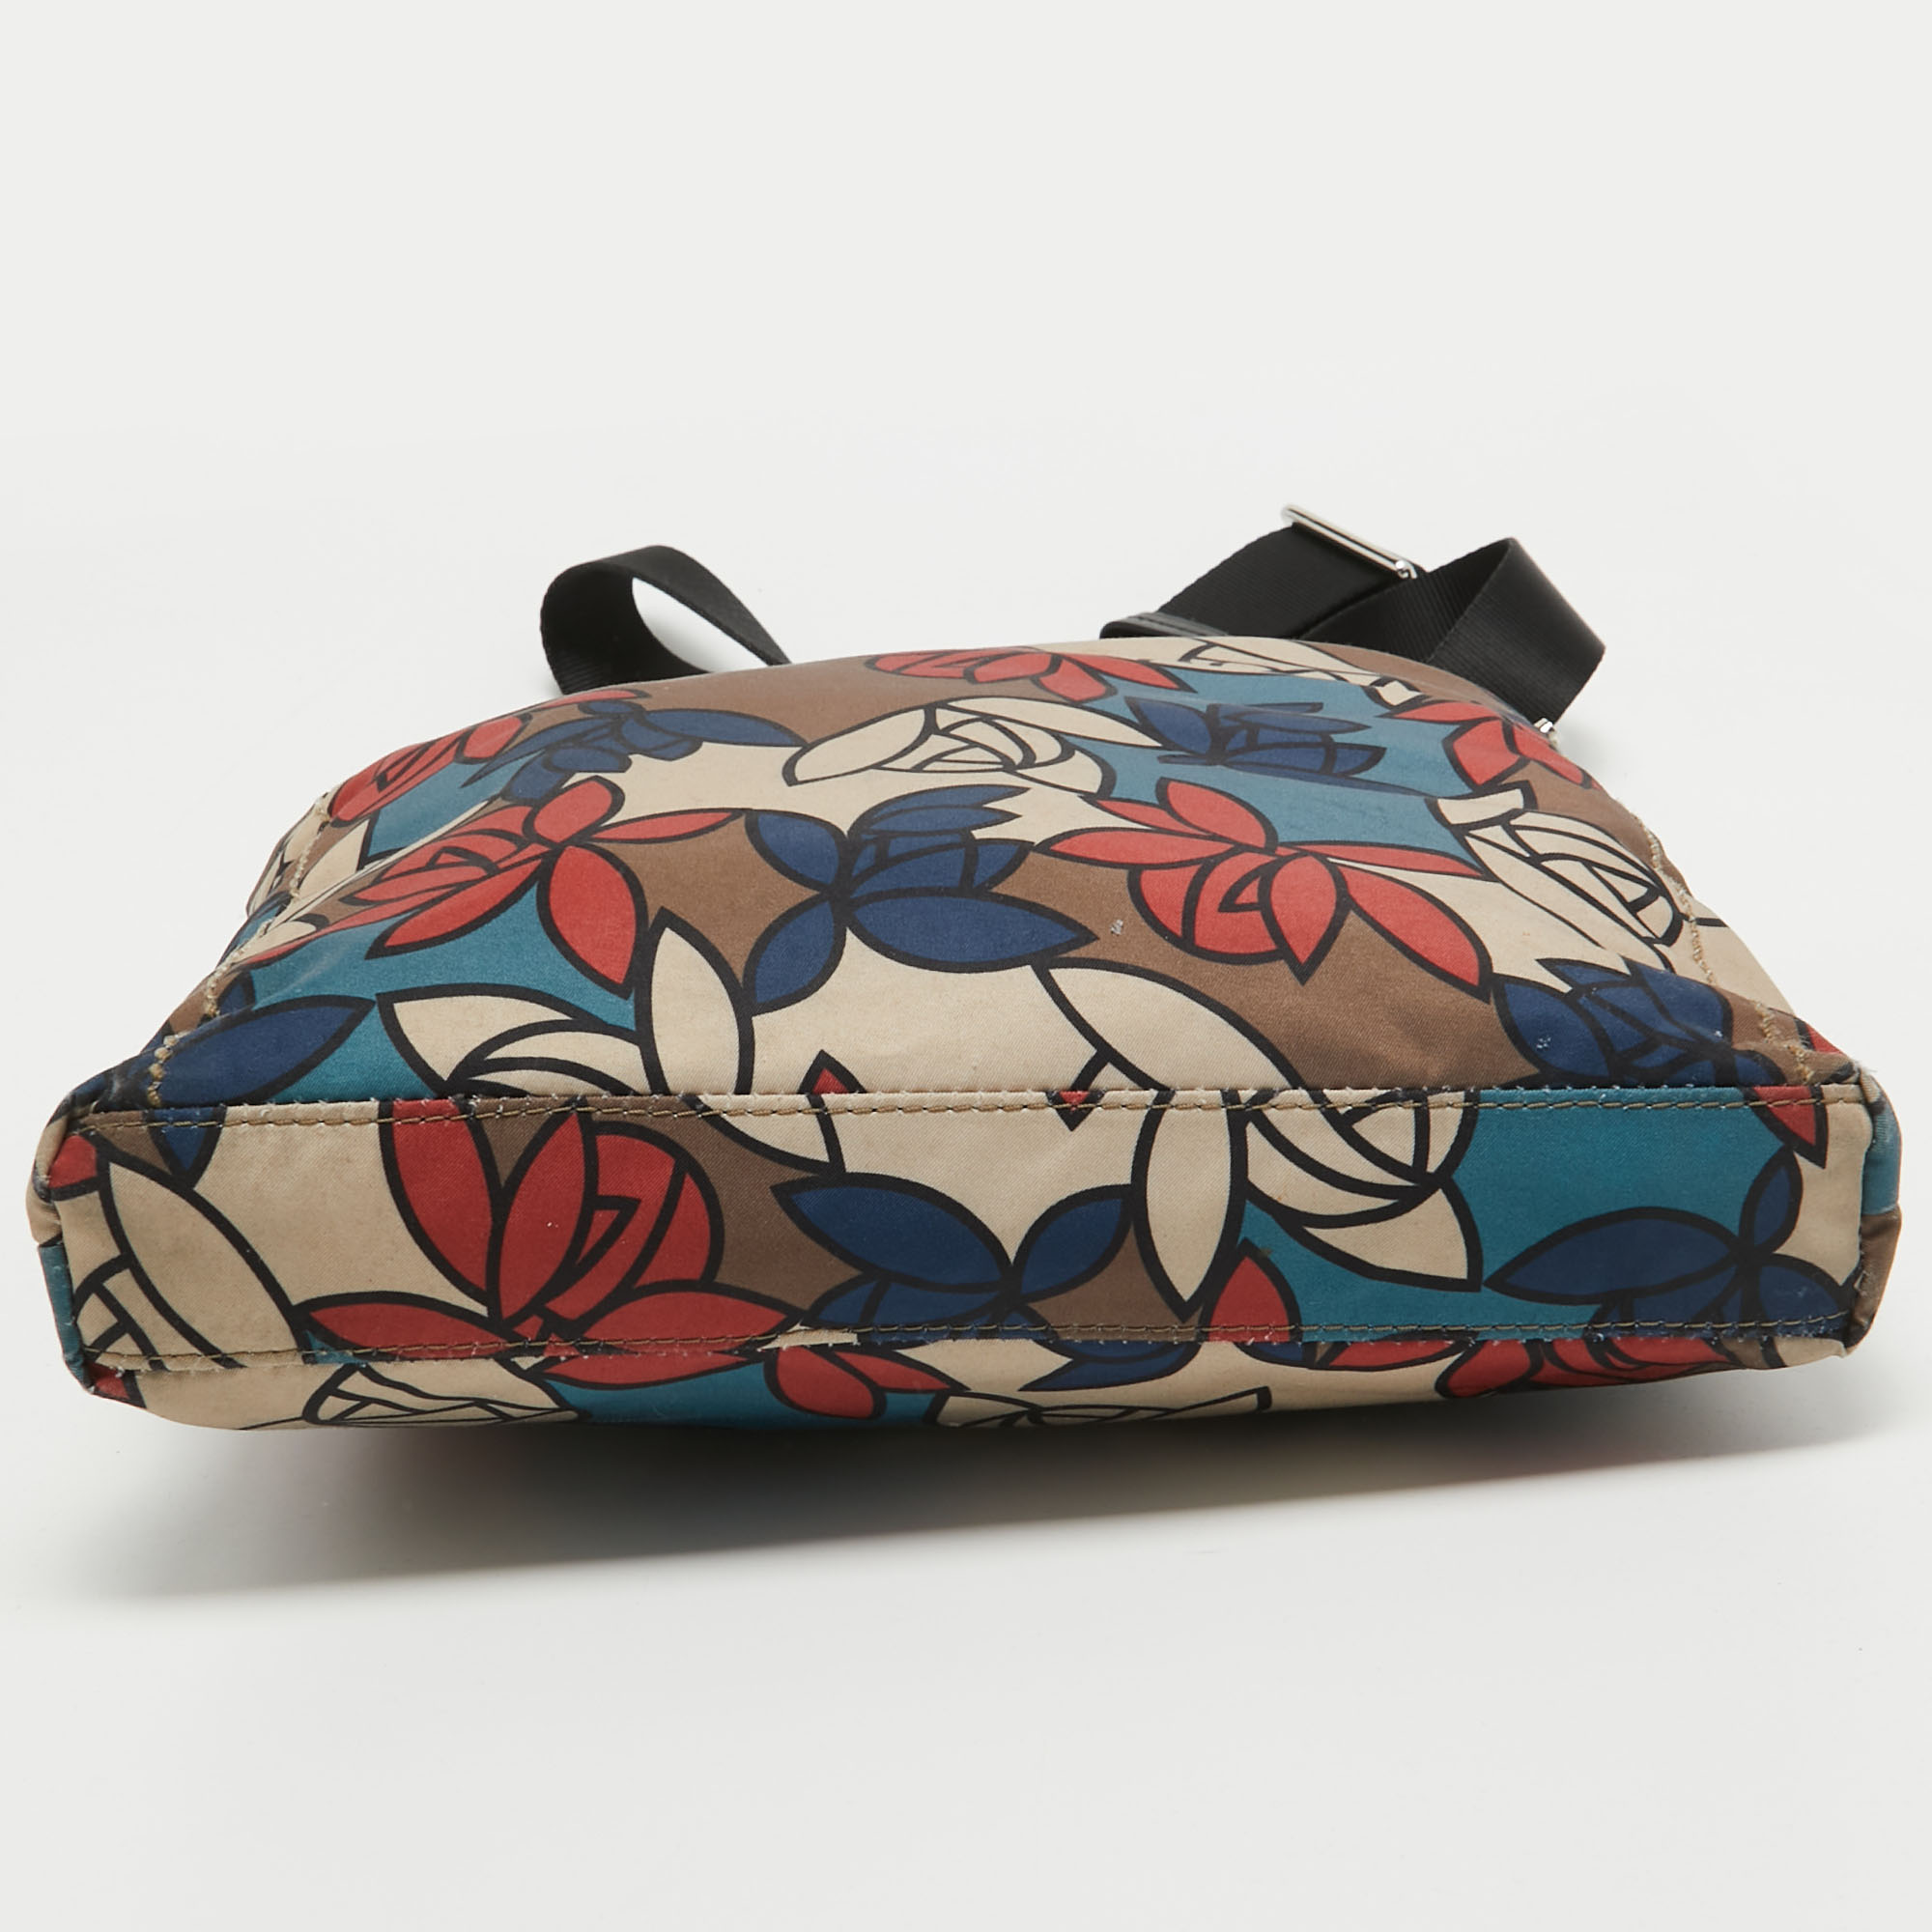 TUMI Multicolor Printed Nylon And Leather Zip Messenger Bag